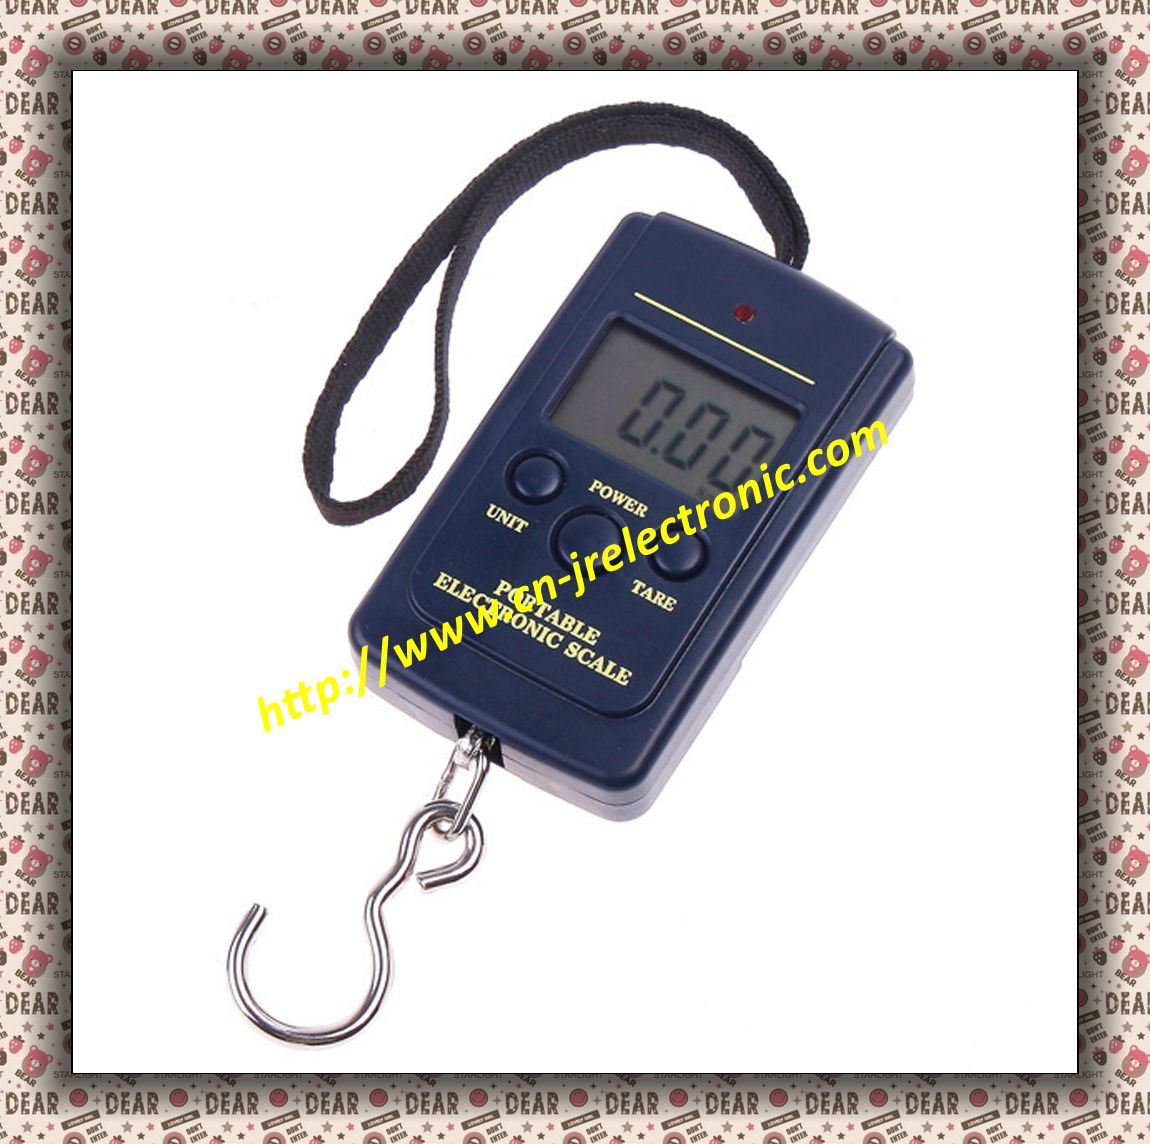 Us$1.40 Cheap Promotion Gift for Weighing Travel Luggage